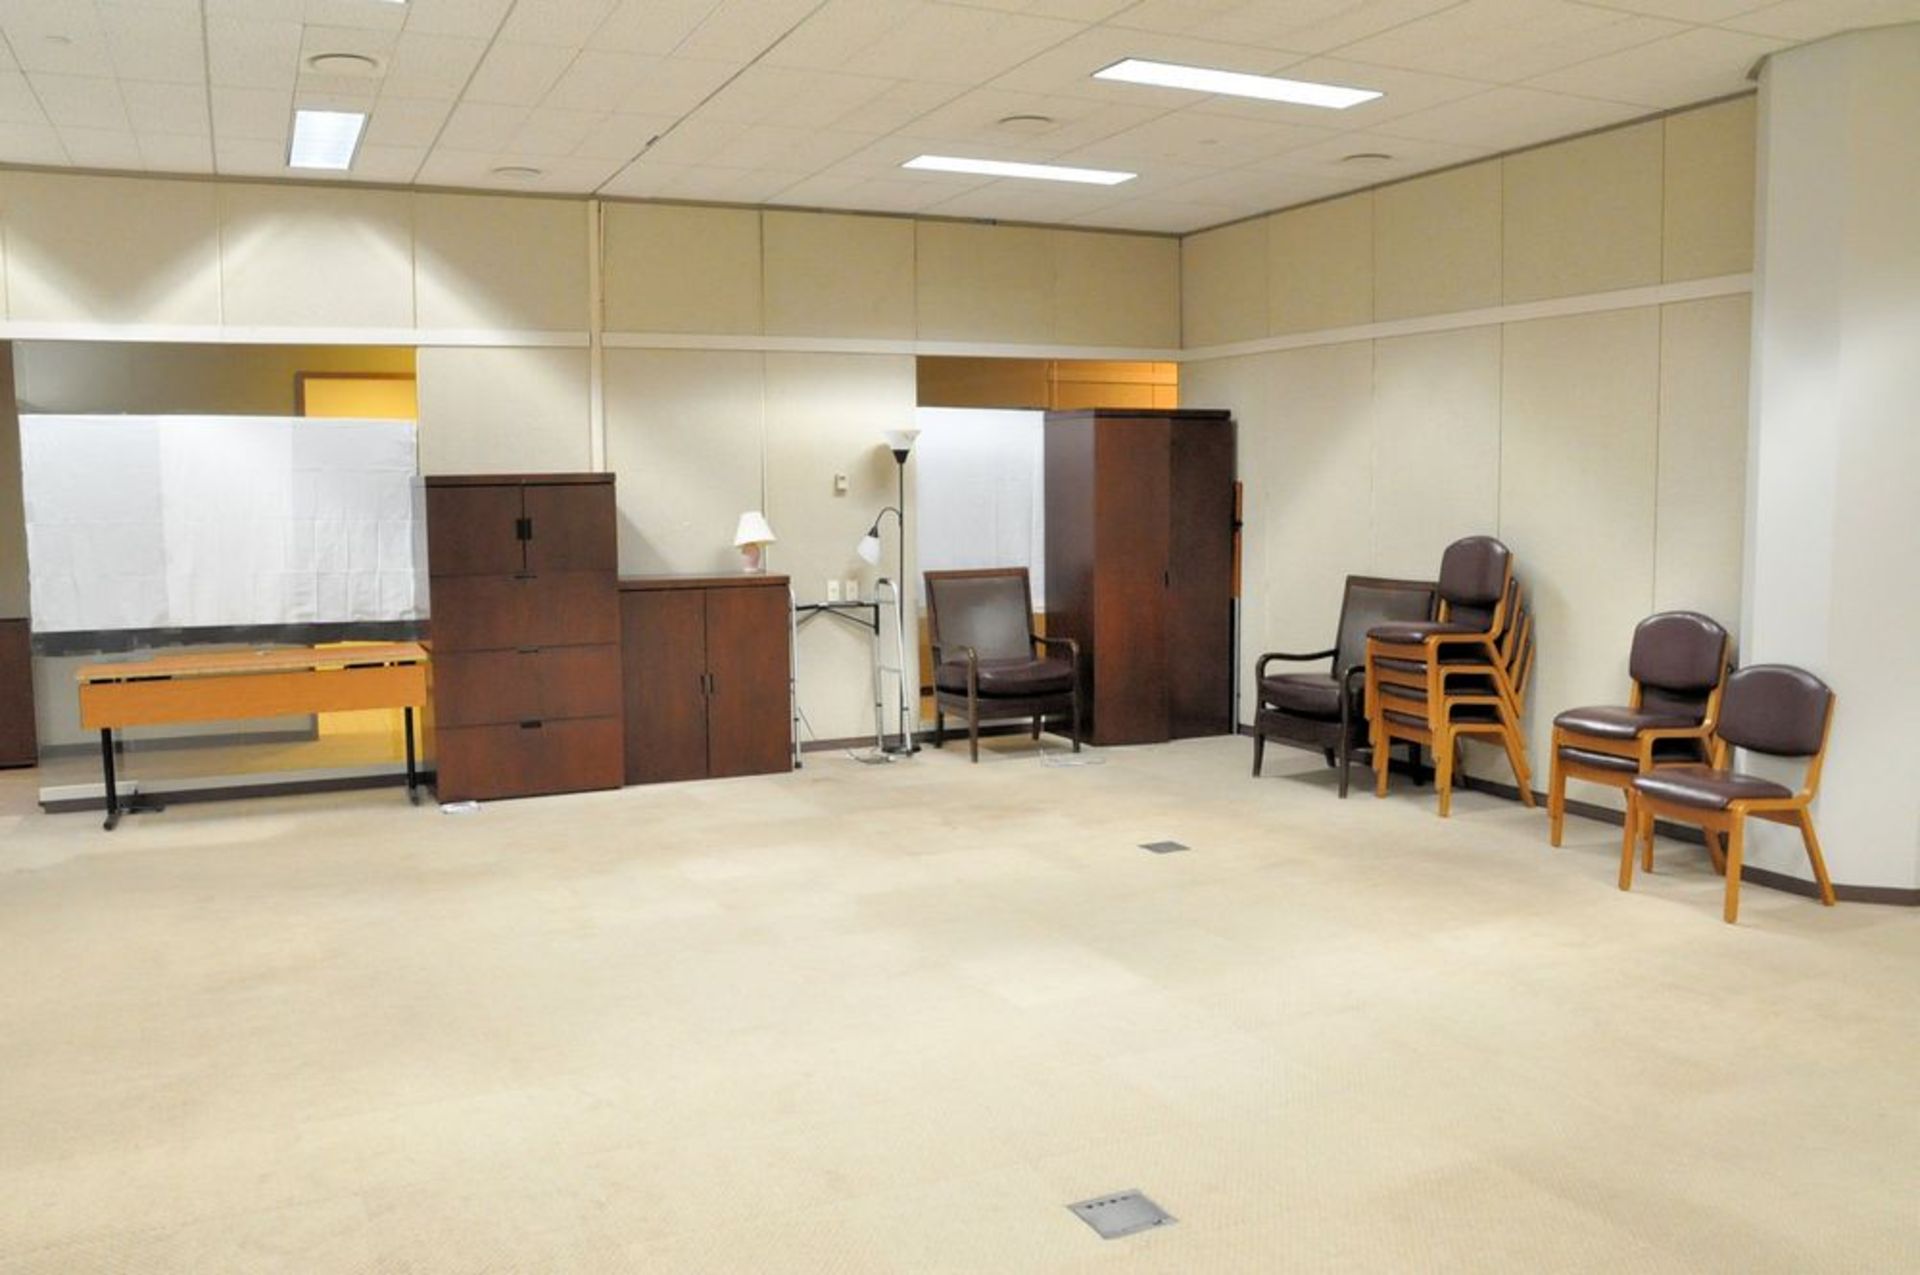 Lot-(2) 2-Door Storage Cabinets, (1) Lateral File Cabinet, (2) Tables, (1) Stand, (9) Chairs, (2)